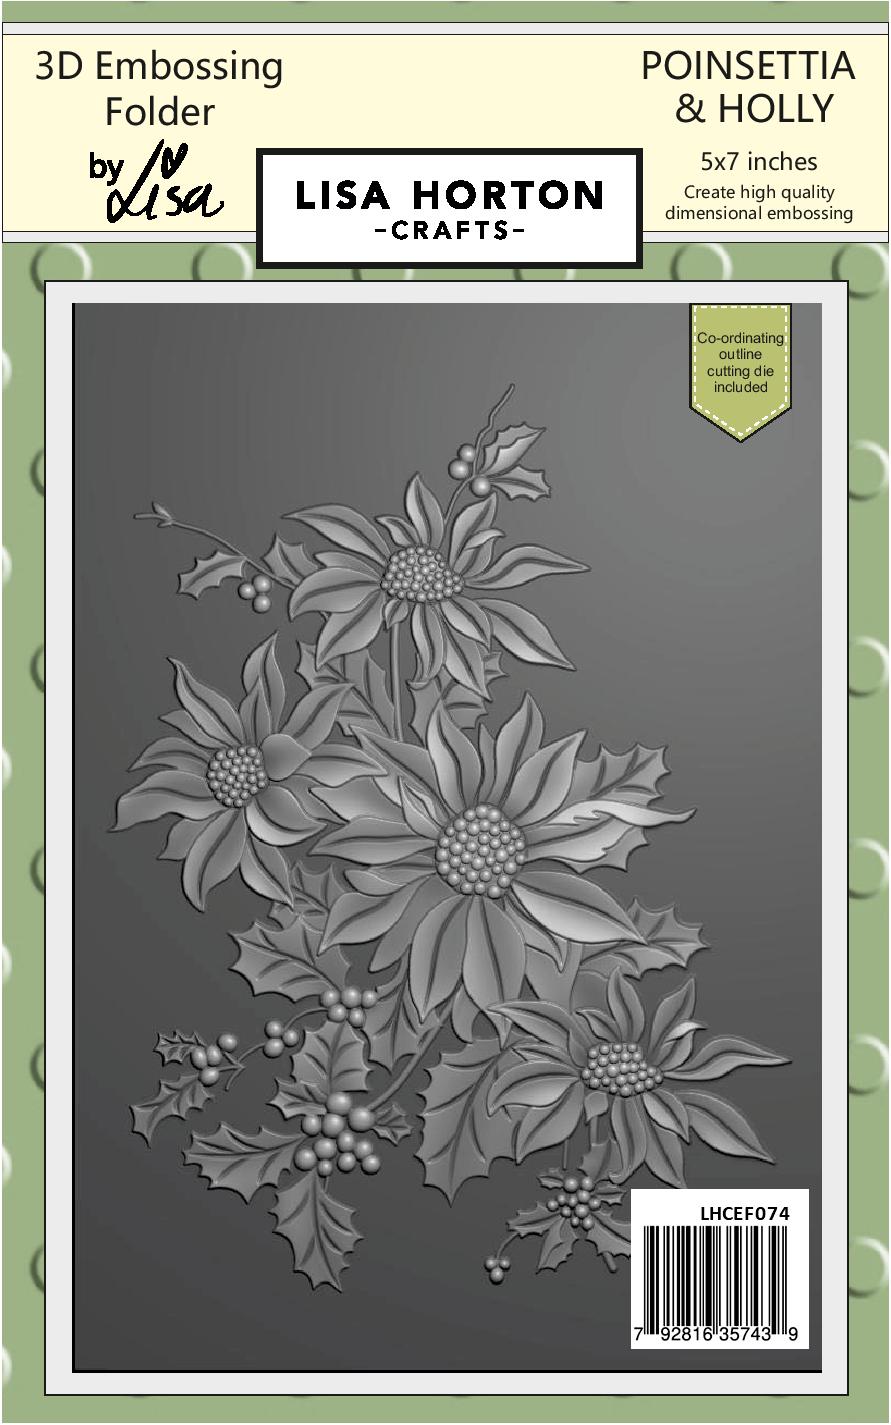 Lisa Horton 3D Embossing Folder 5x7 With Cutting Die - Poinsettia & Holly